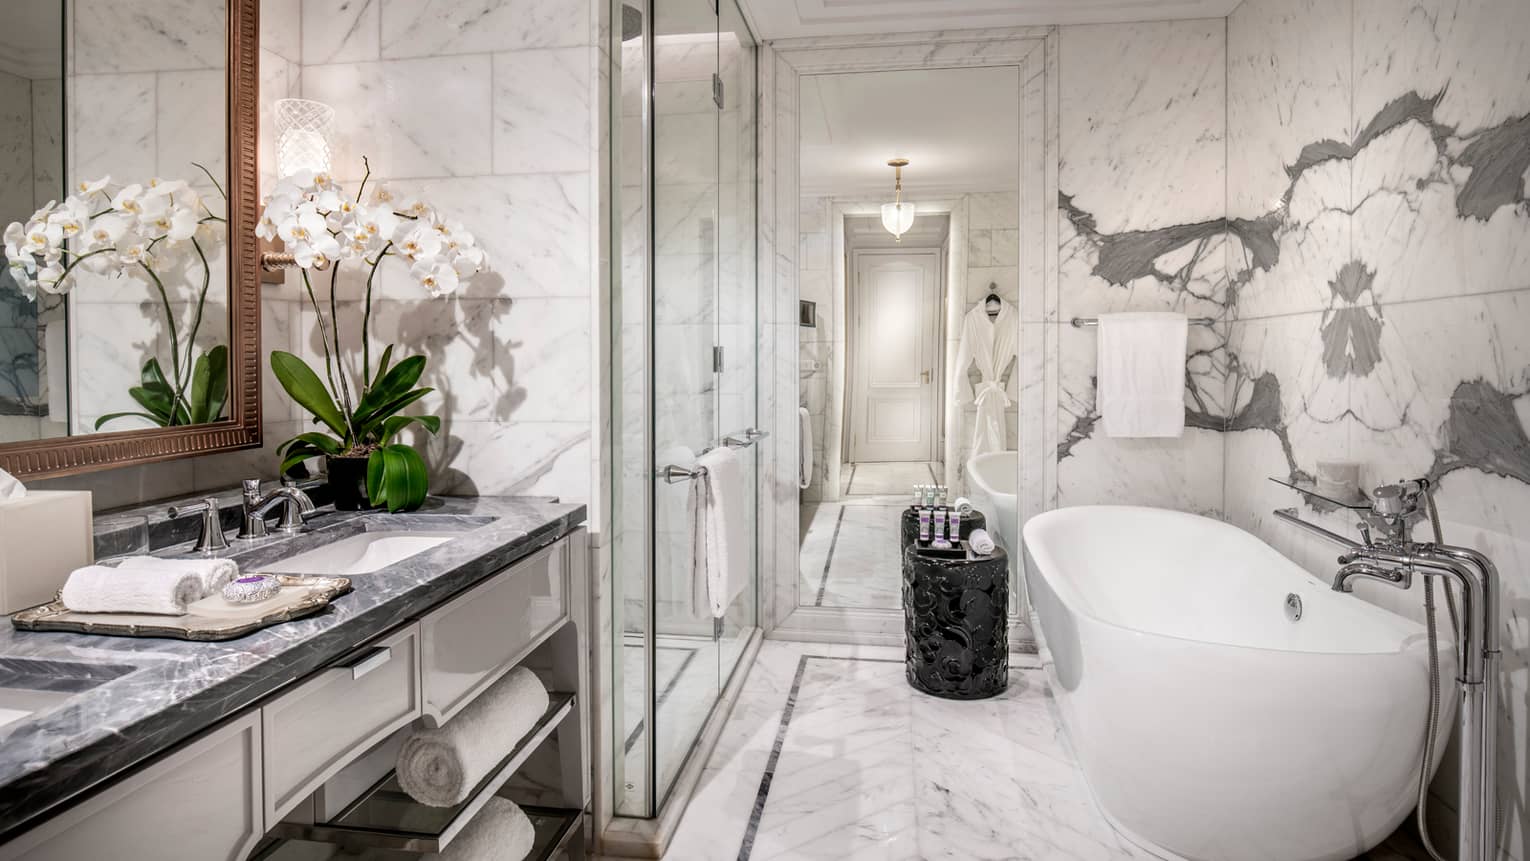 Modern bathroom with grey marble counters, white orchids in vase, glass shower